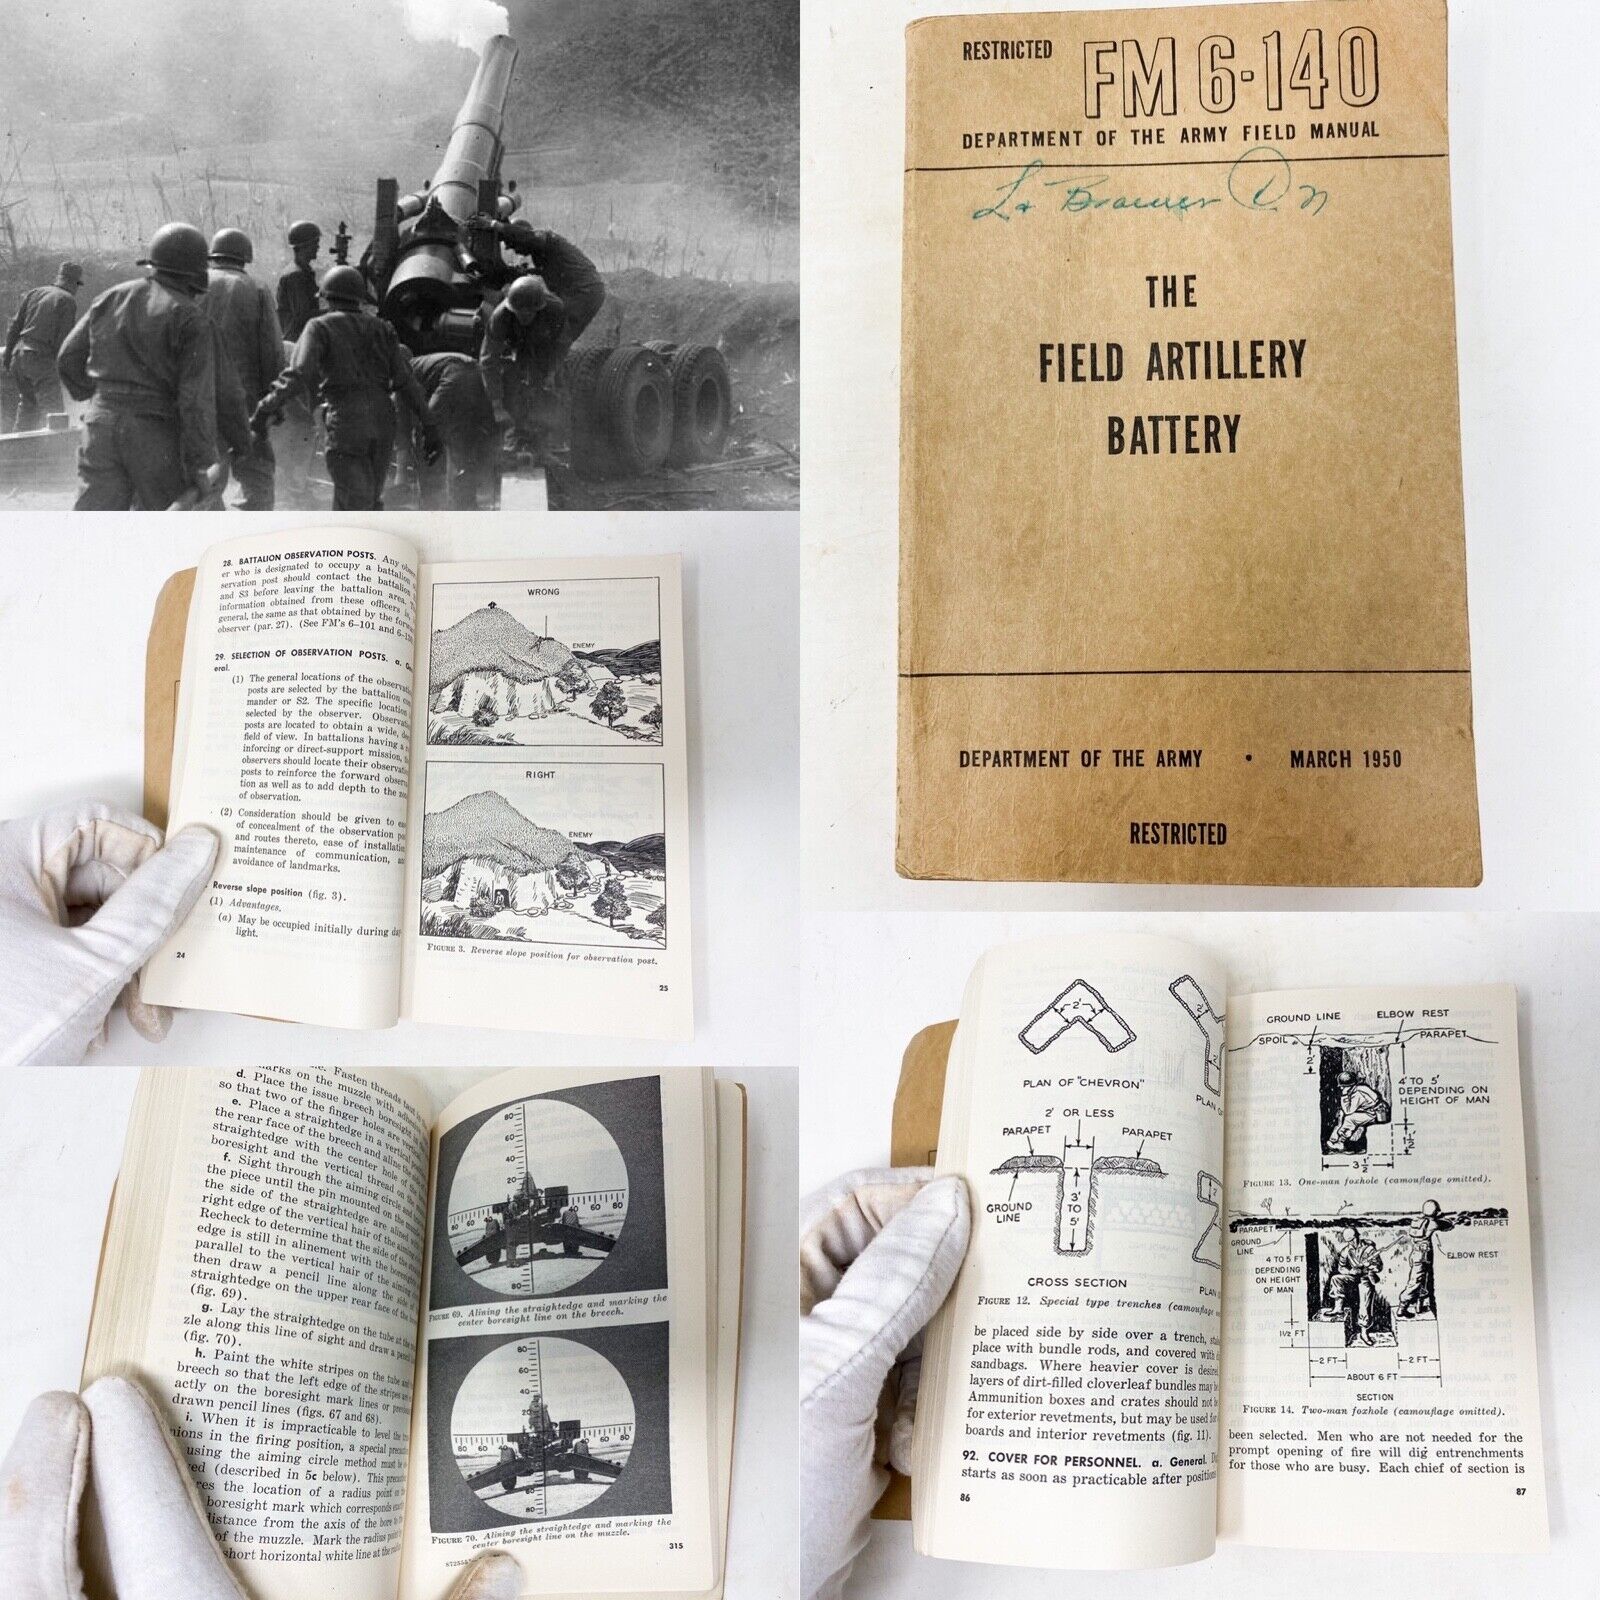 RESTRICTED Korean War March 1950 Army ‘The Field Artillery Battery Book’ Relic